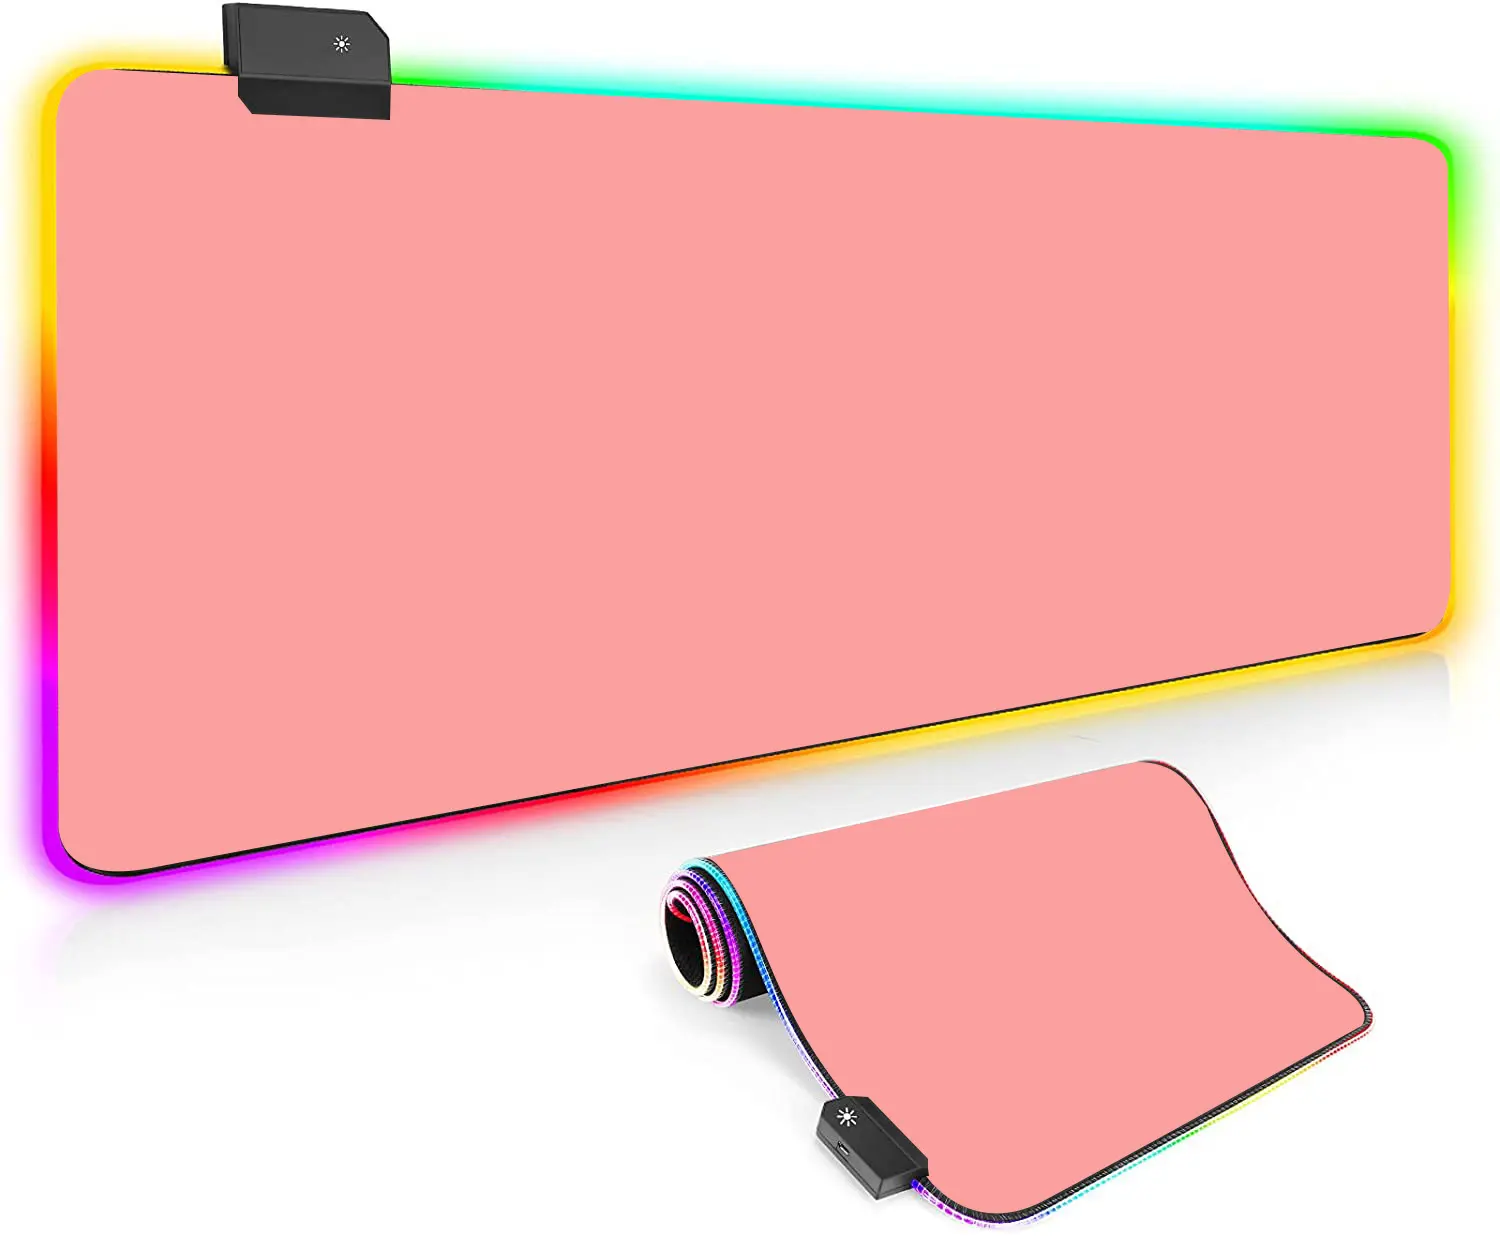 custom lighting colorful RGB mice pads pink led game non-slip USB mouse pads